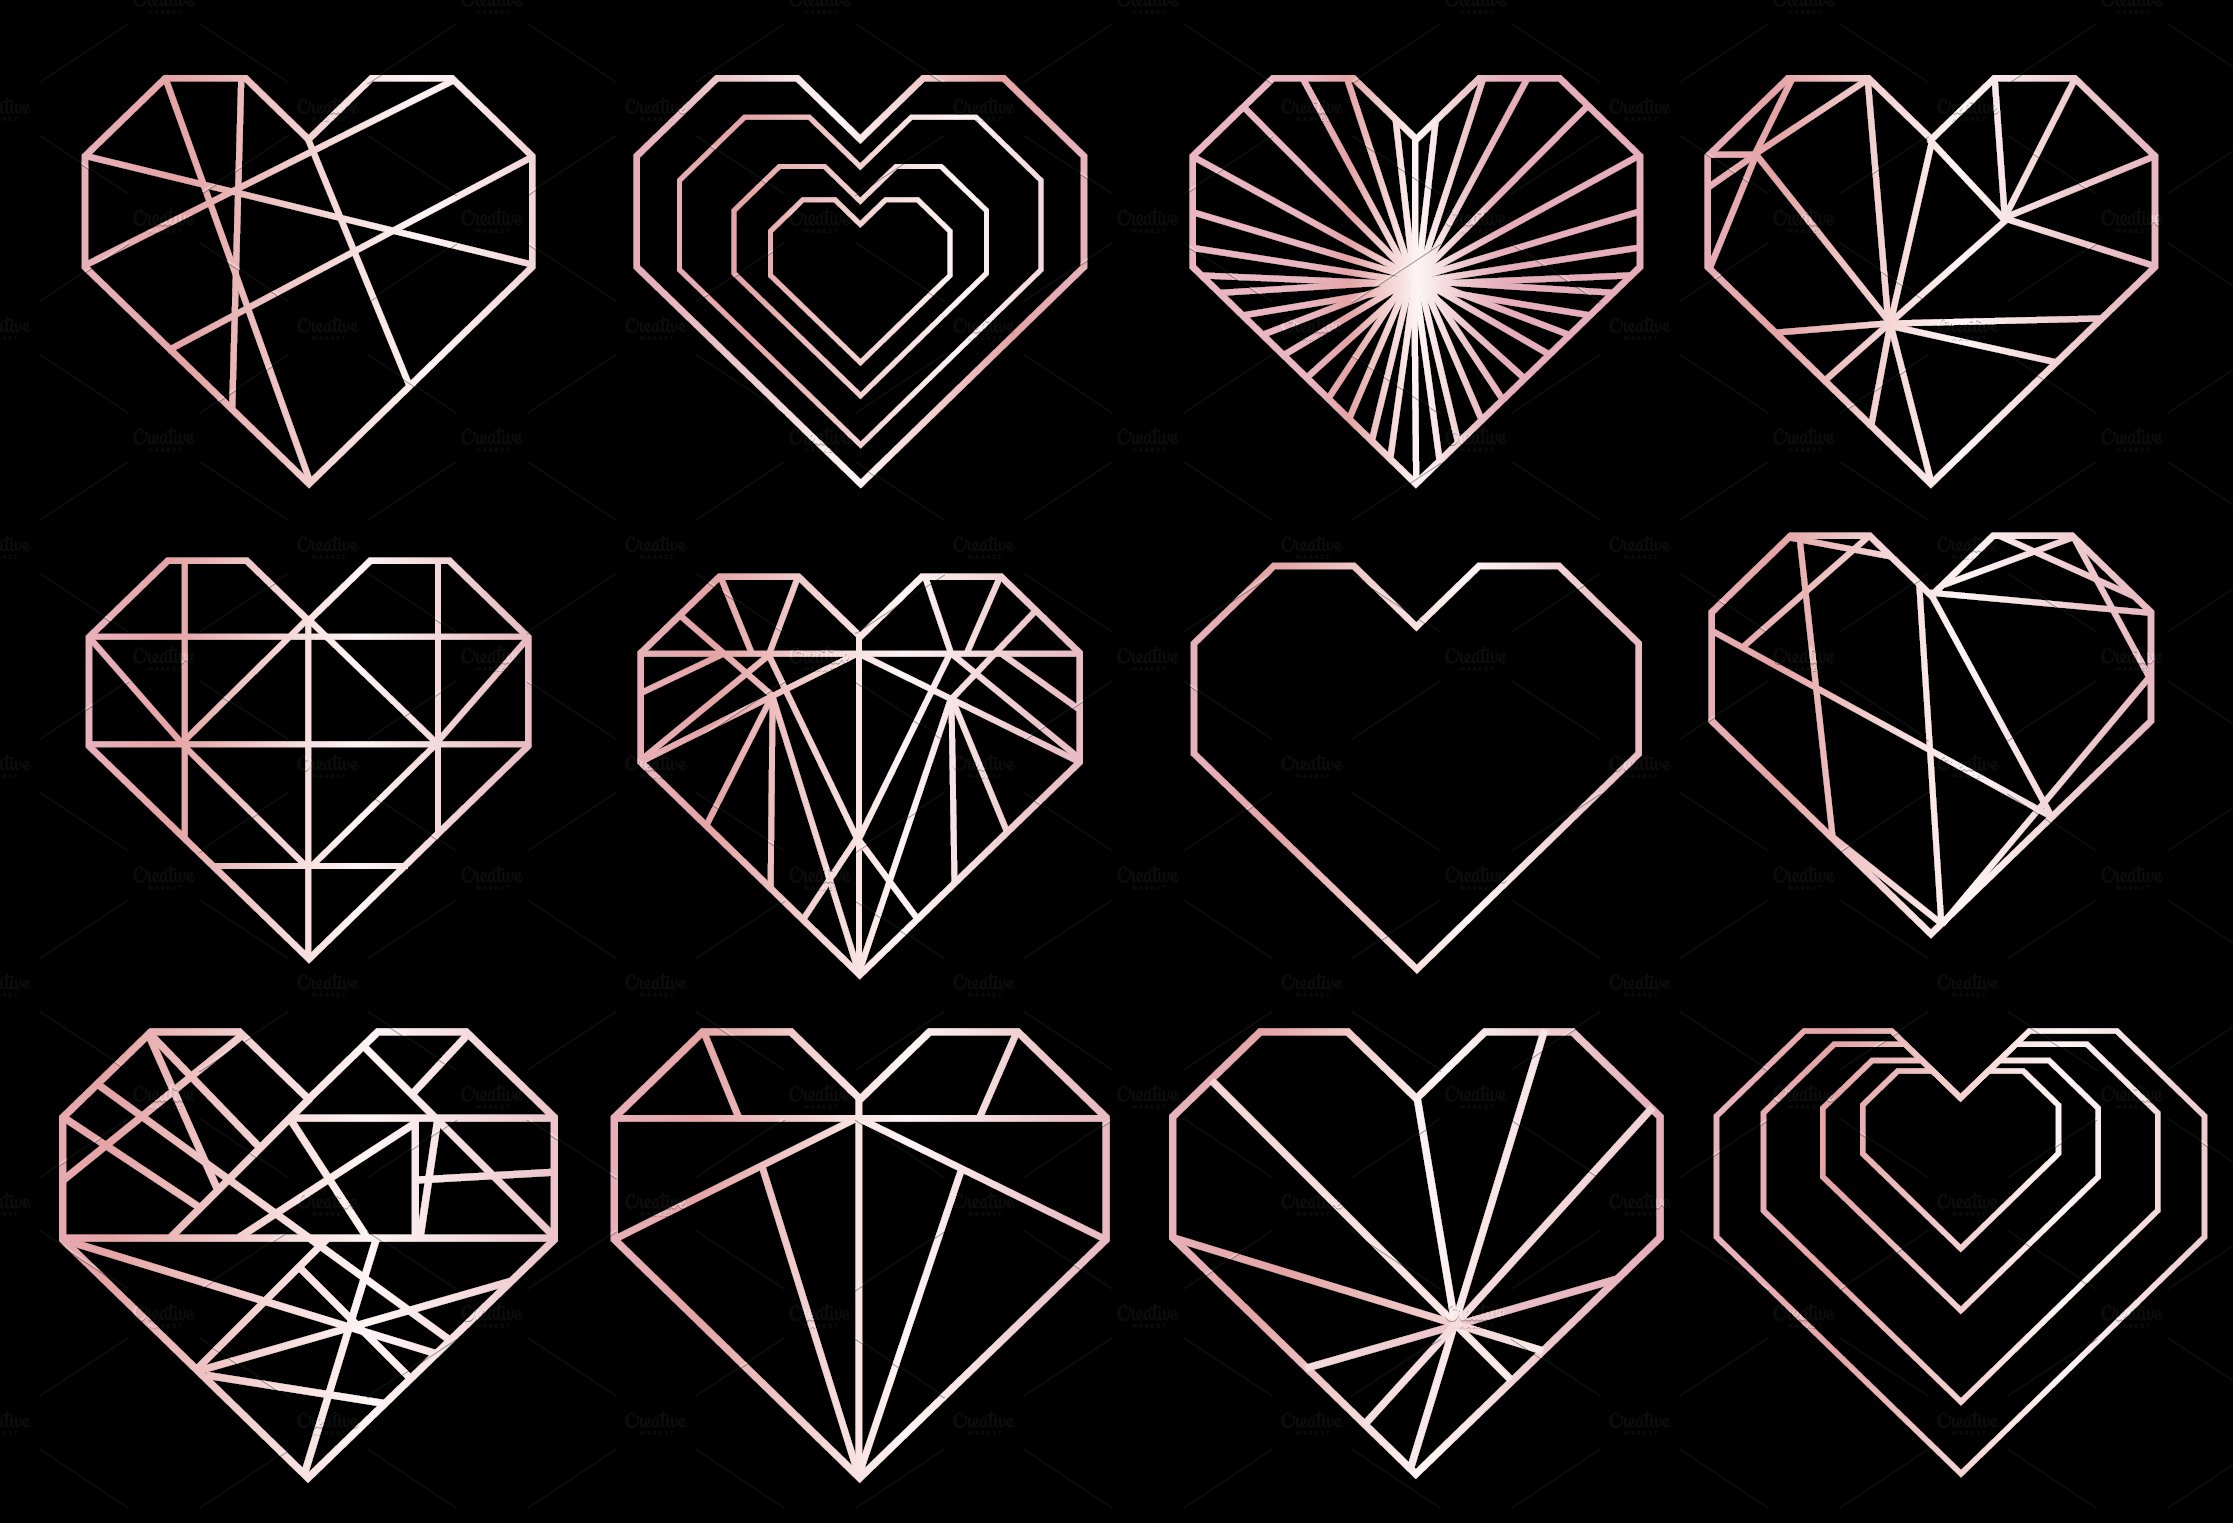 Black background and delicate pink hearts.